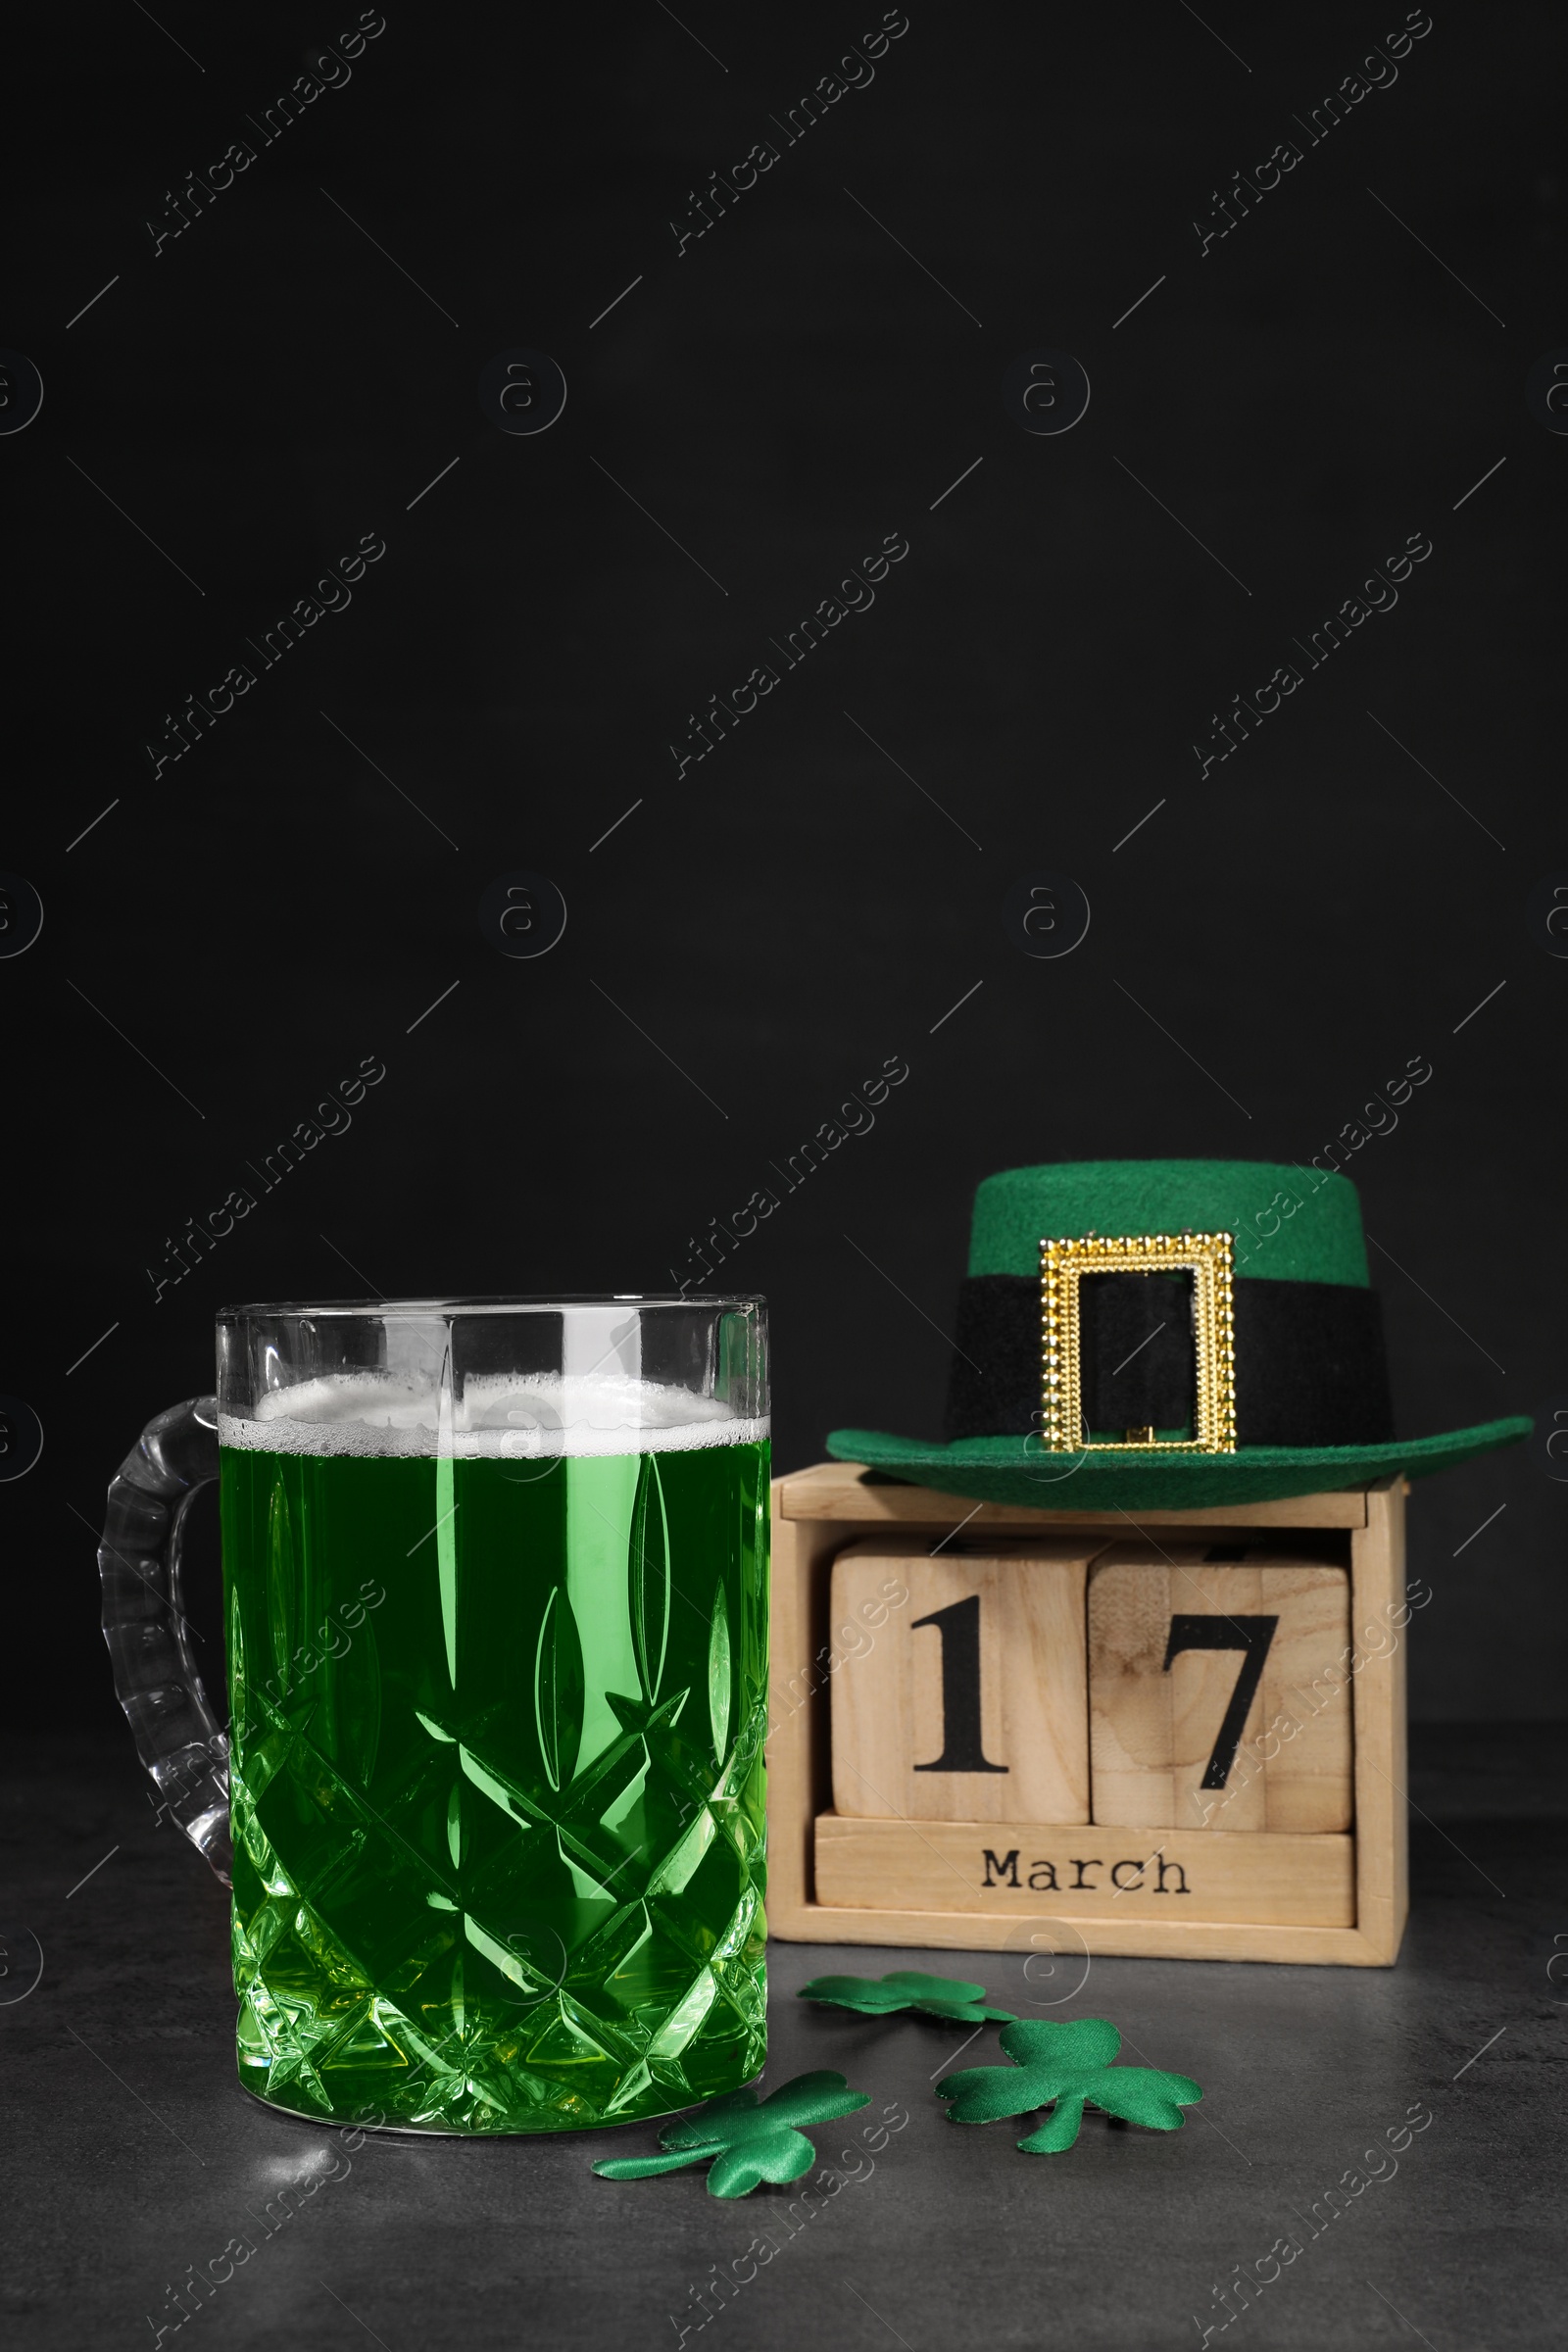 Photo of St. Patrick's day celebrating on March 17. Green beer, wooden block calendar, leprechaun hat and decorative clover leaves on grey table. Space for text